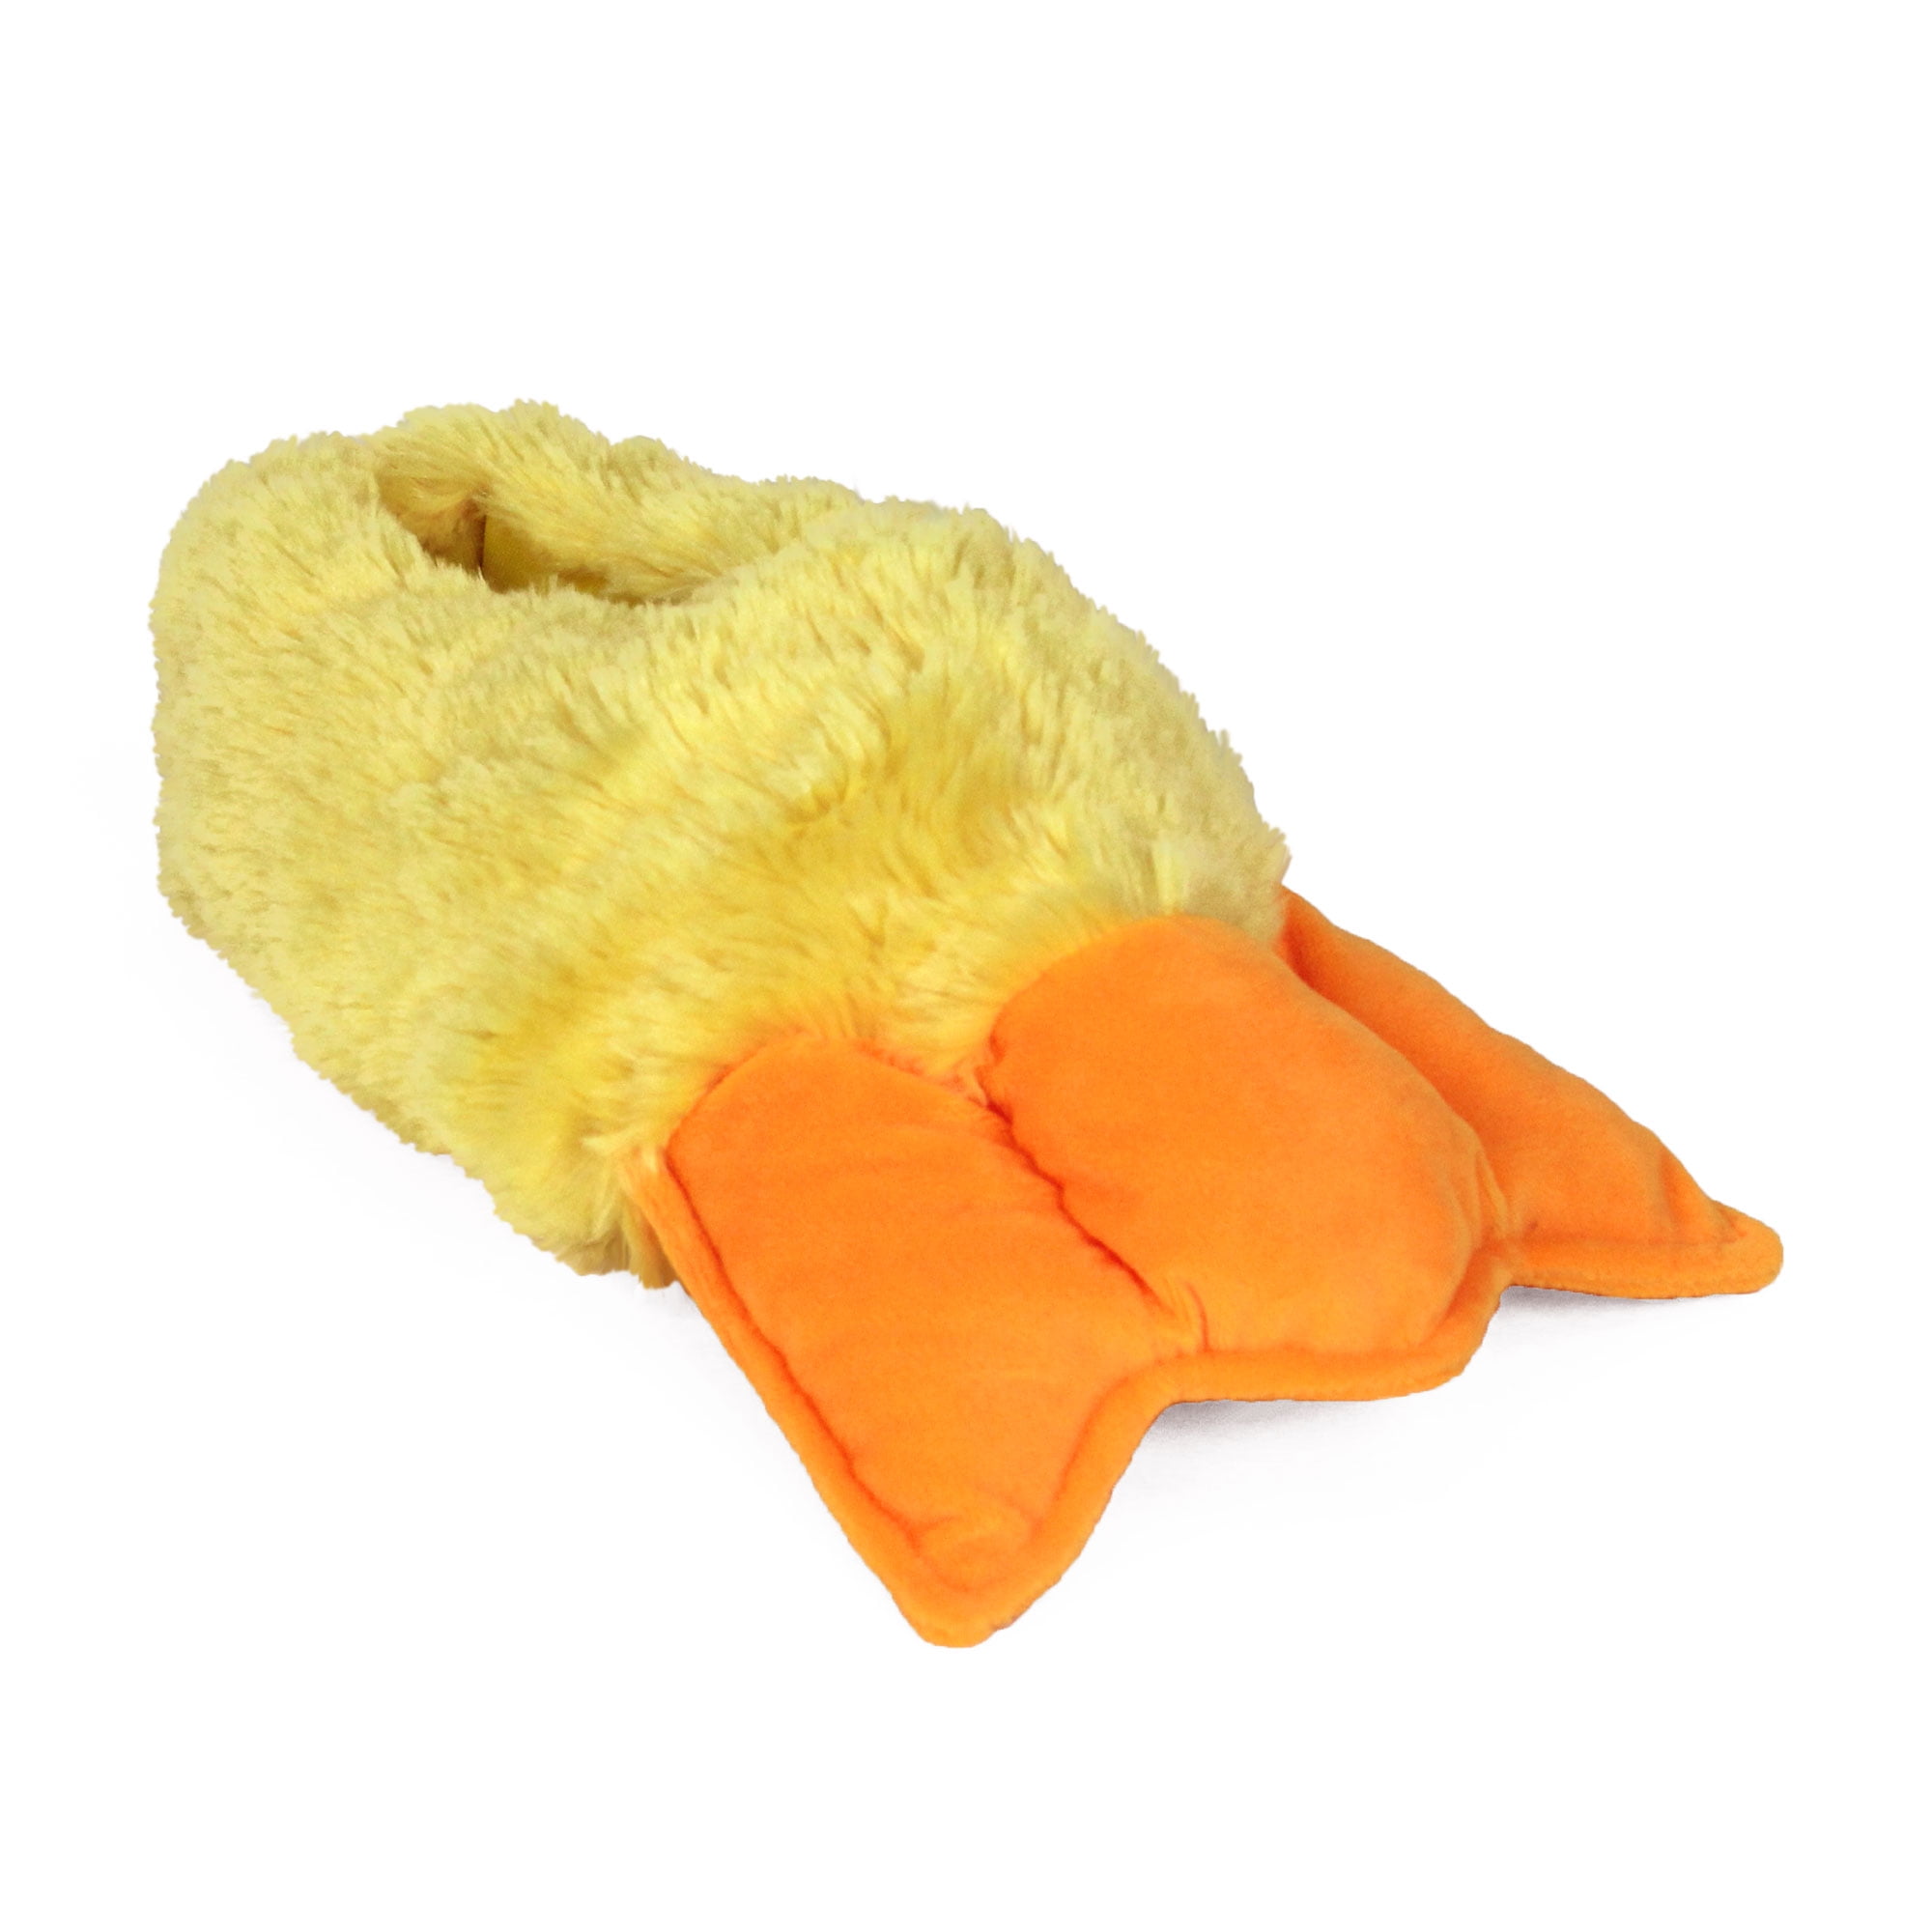 Slippers - Plush Yellow for Adults Unisex One Size by Everberry -